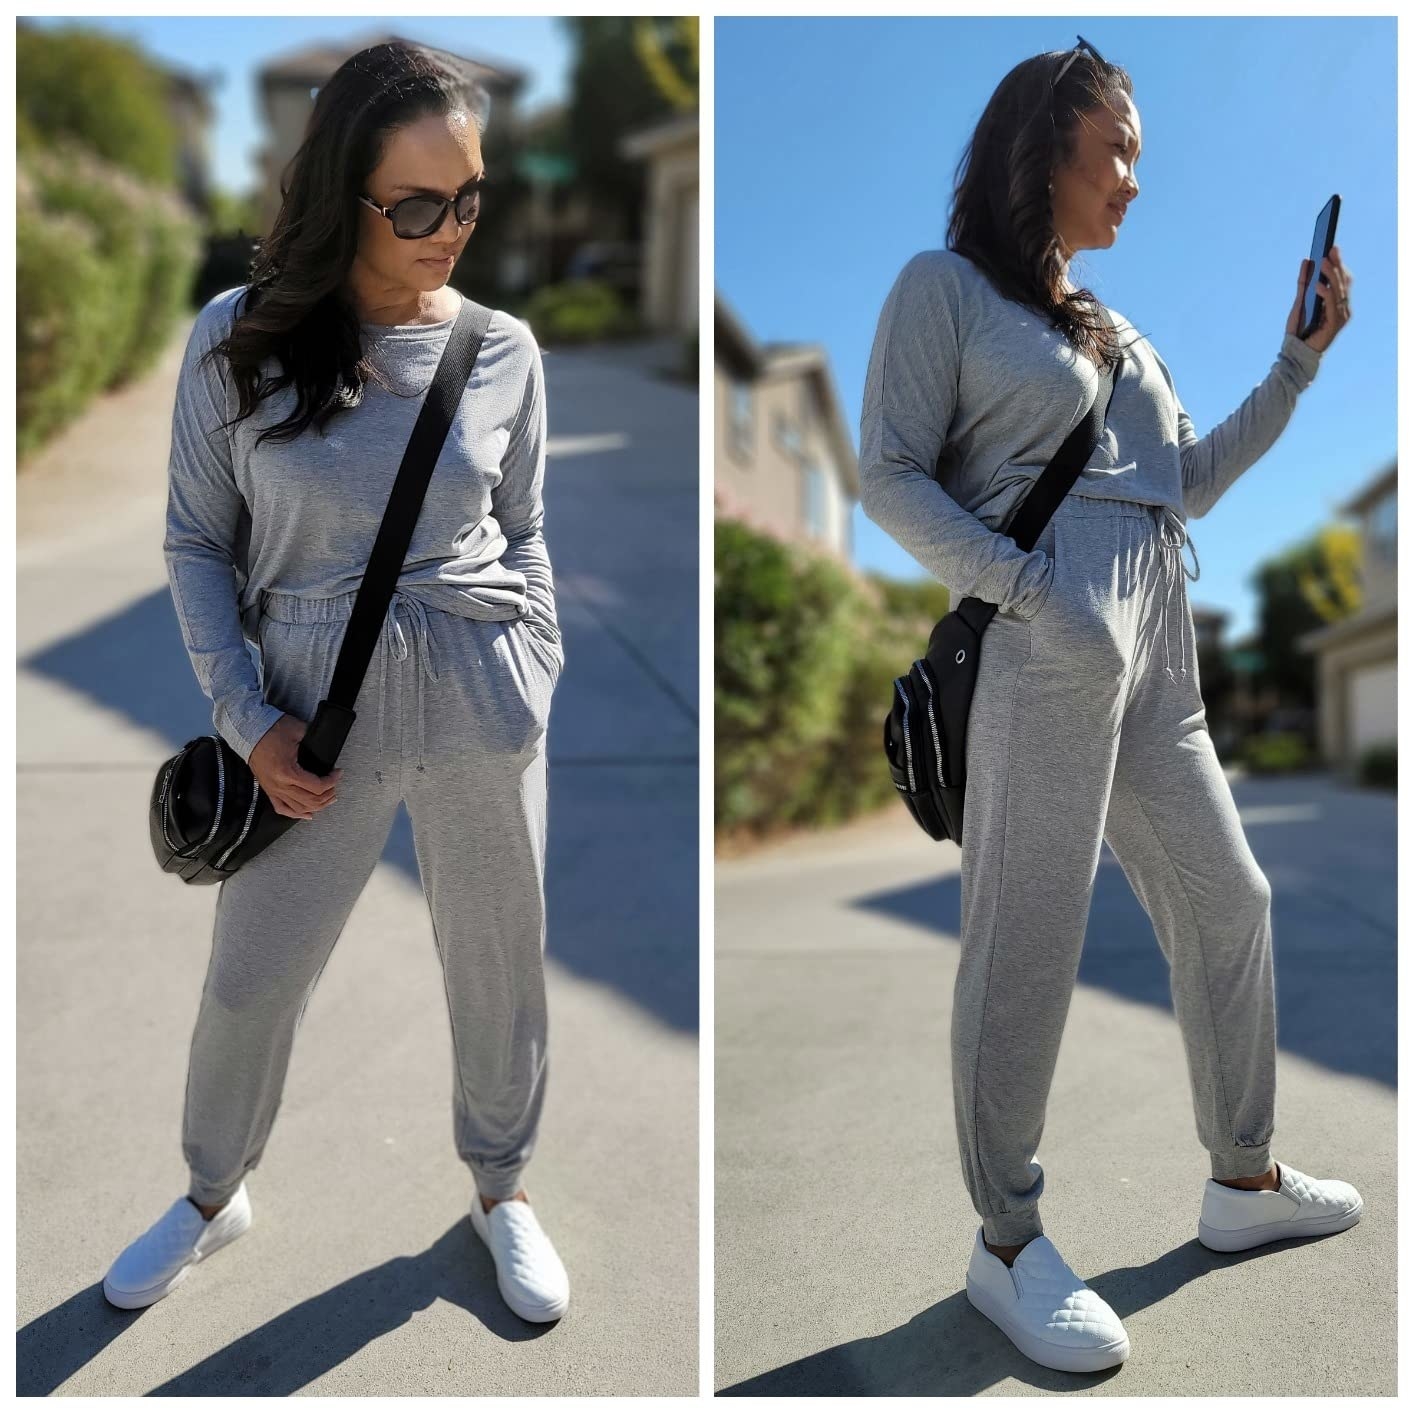 reviewer wearing the gray sweat suit